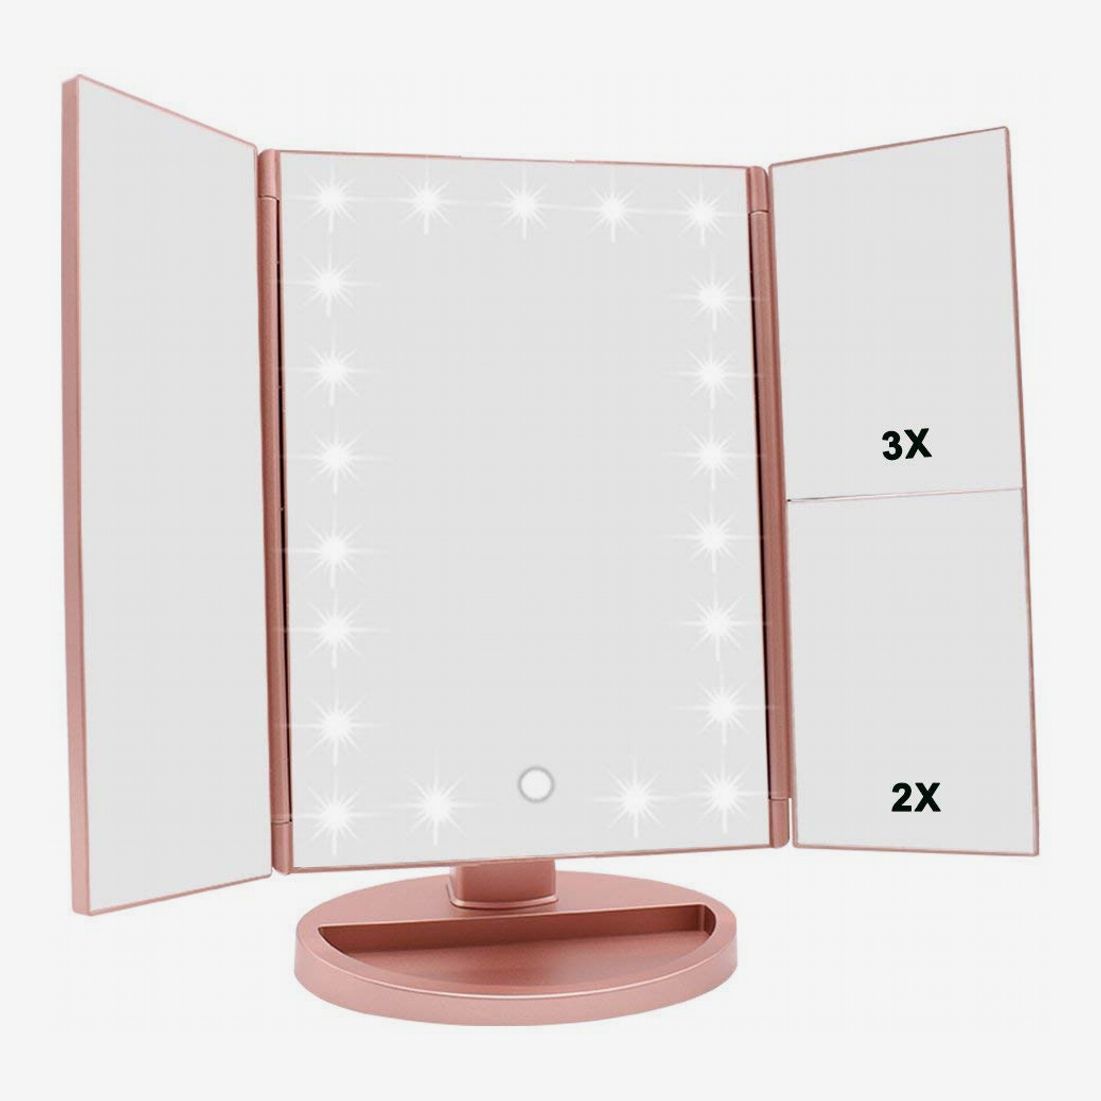 14 Best Lighted Makeup Mirrors 2021, Vanity Mirror With Stand